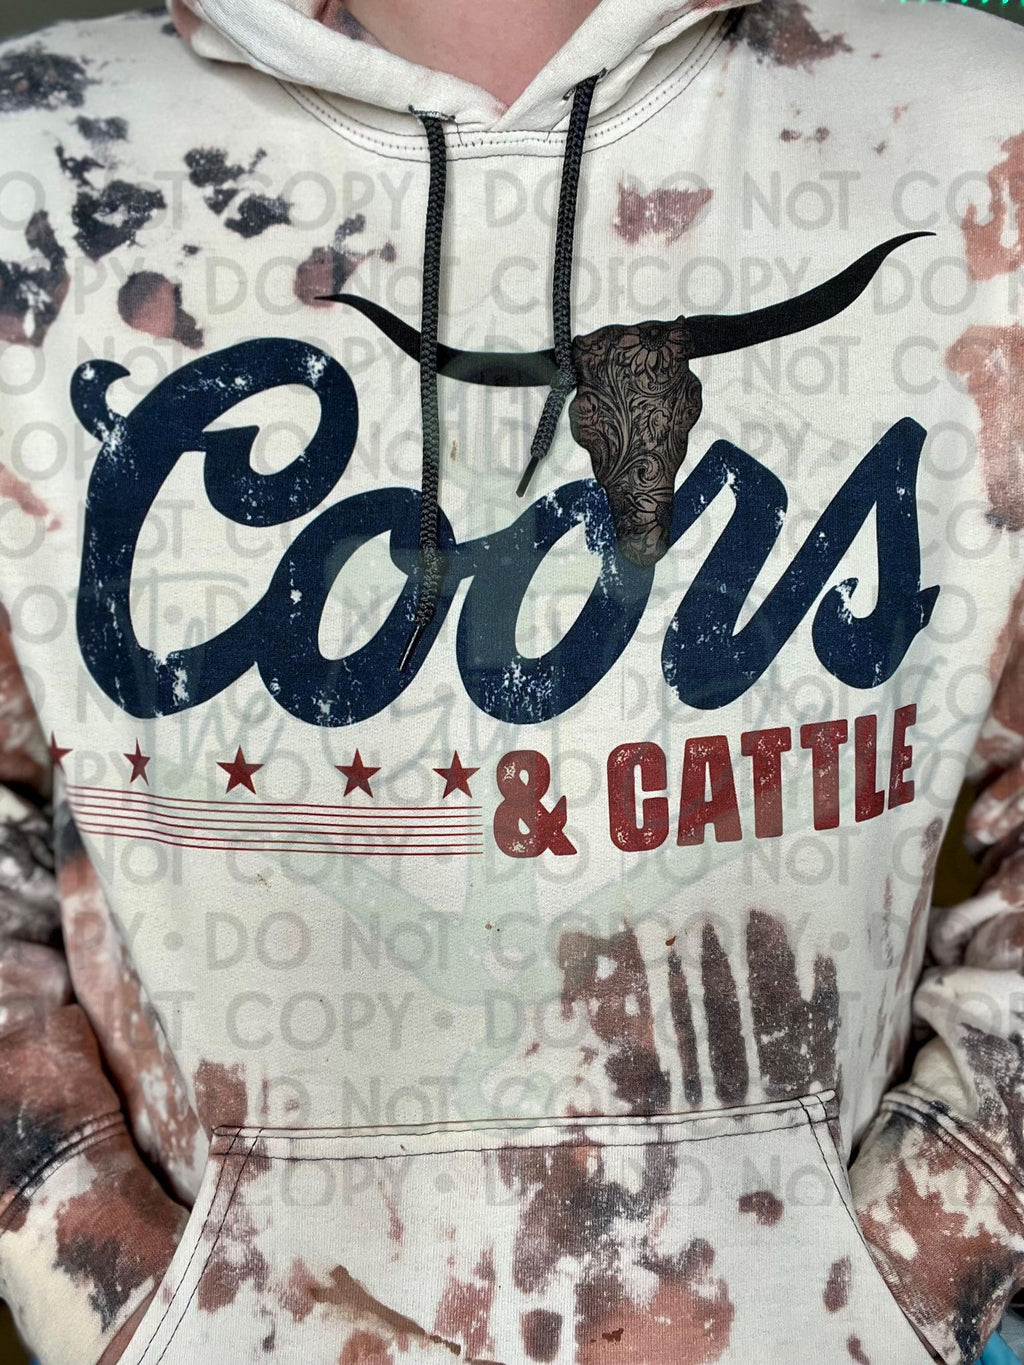 Coors and Cattle Top Design